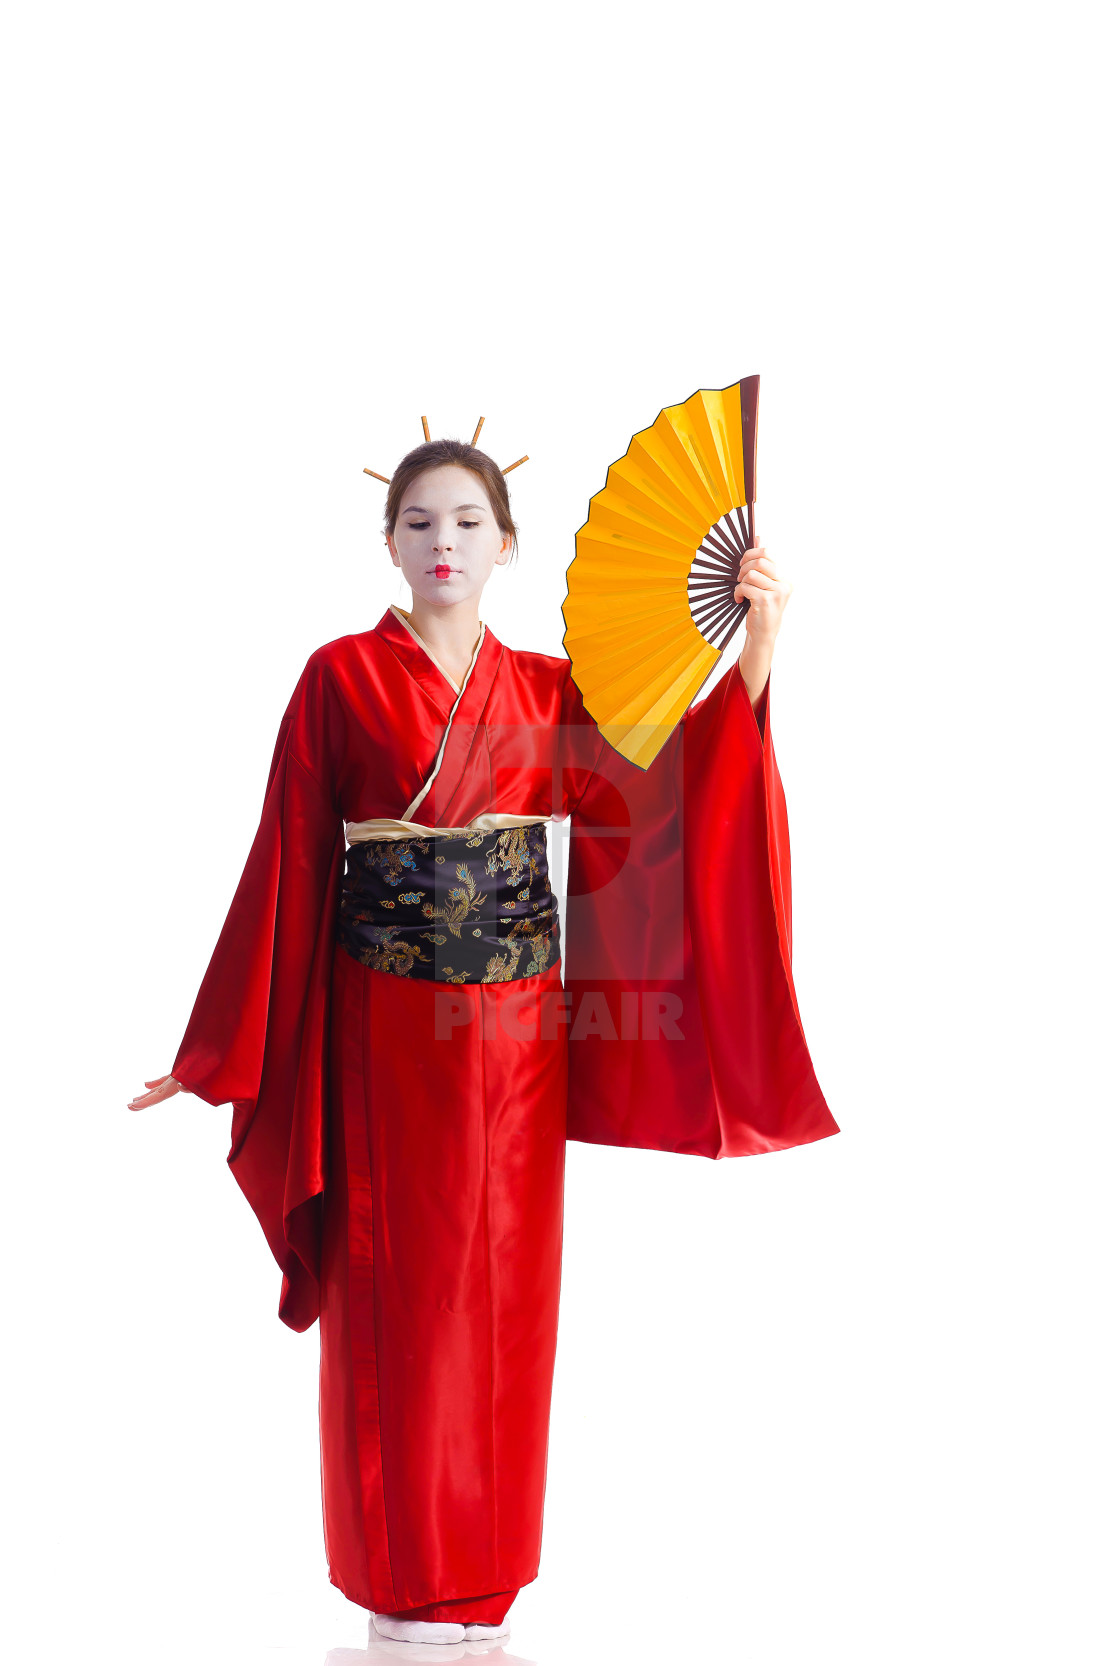 Caroline Effectief Wild The girl in native costume of japanese geisha - License, download or print  for £8.68 | Photos | Picfair